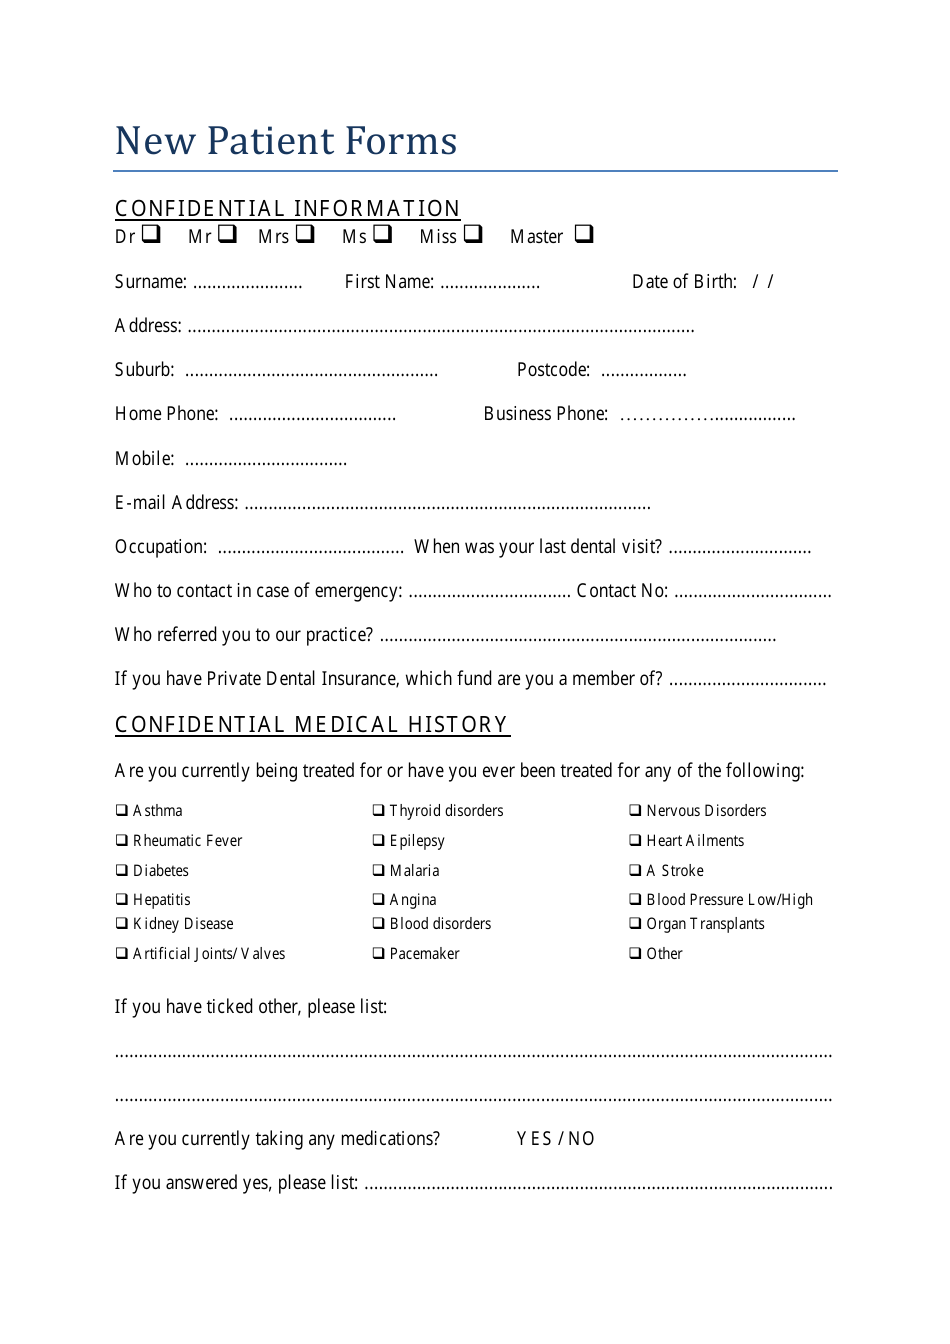 New Patient Confidential Information And Medical History Forms Download Printable Pdf 5789